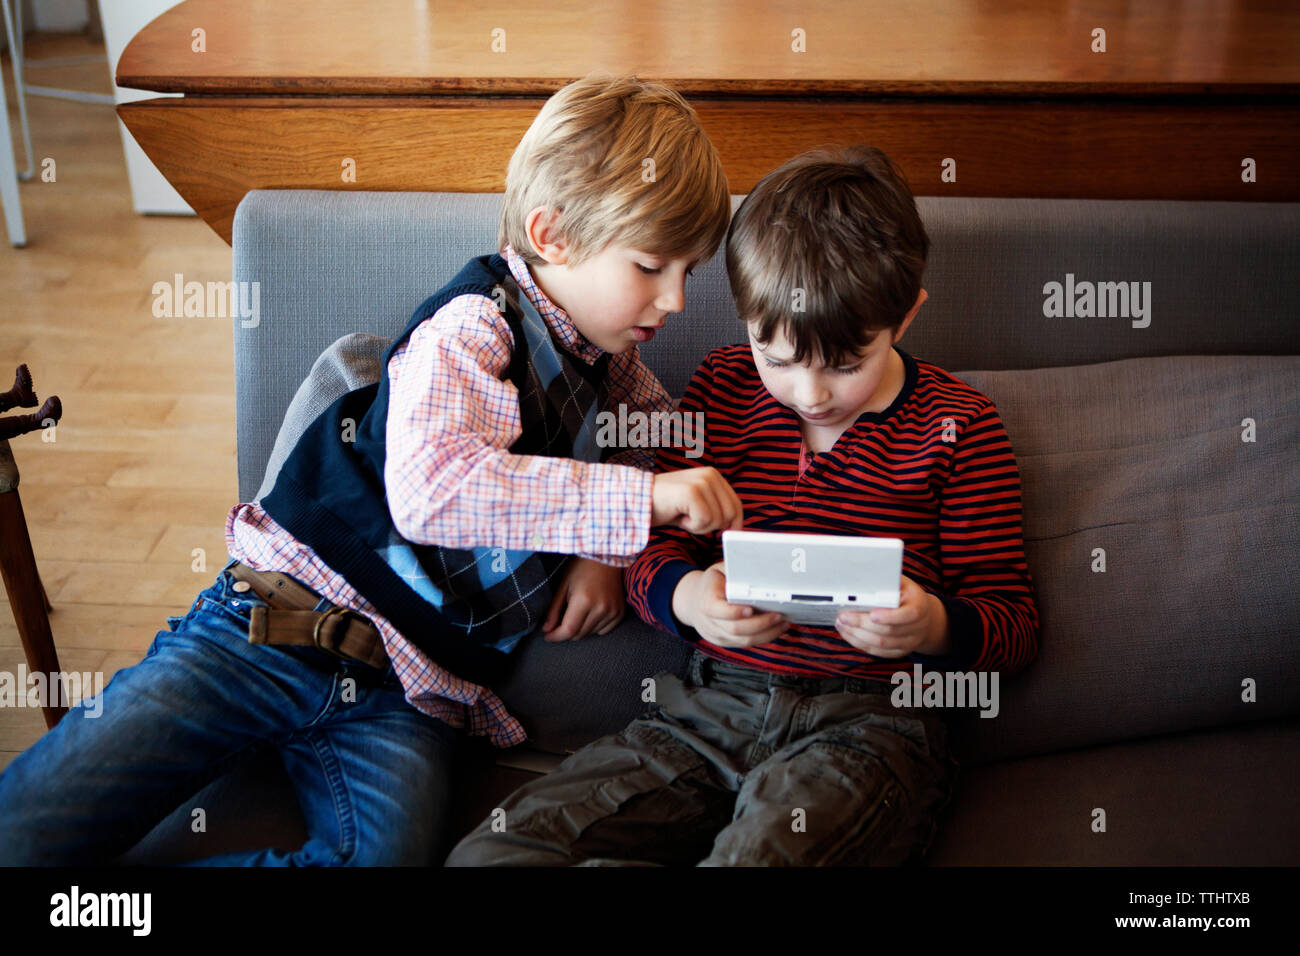 High angle view of siblings playing video game while sitting on sofa at home Banque D'Images